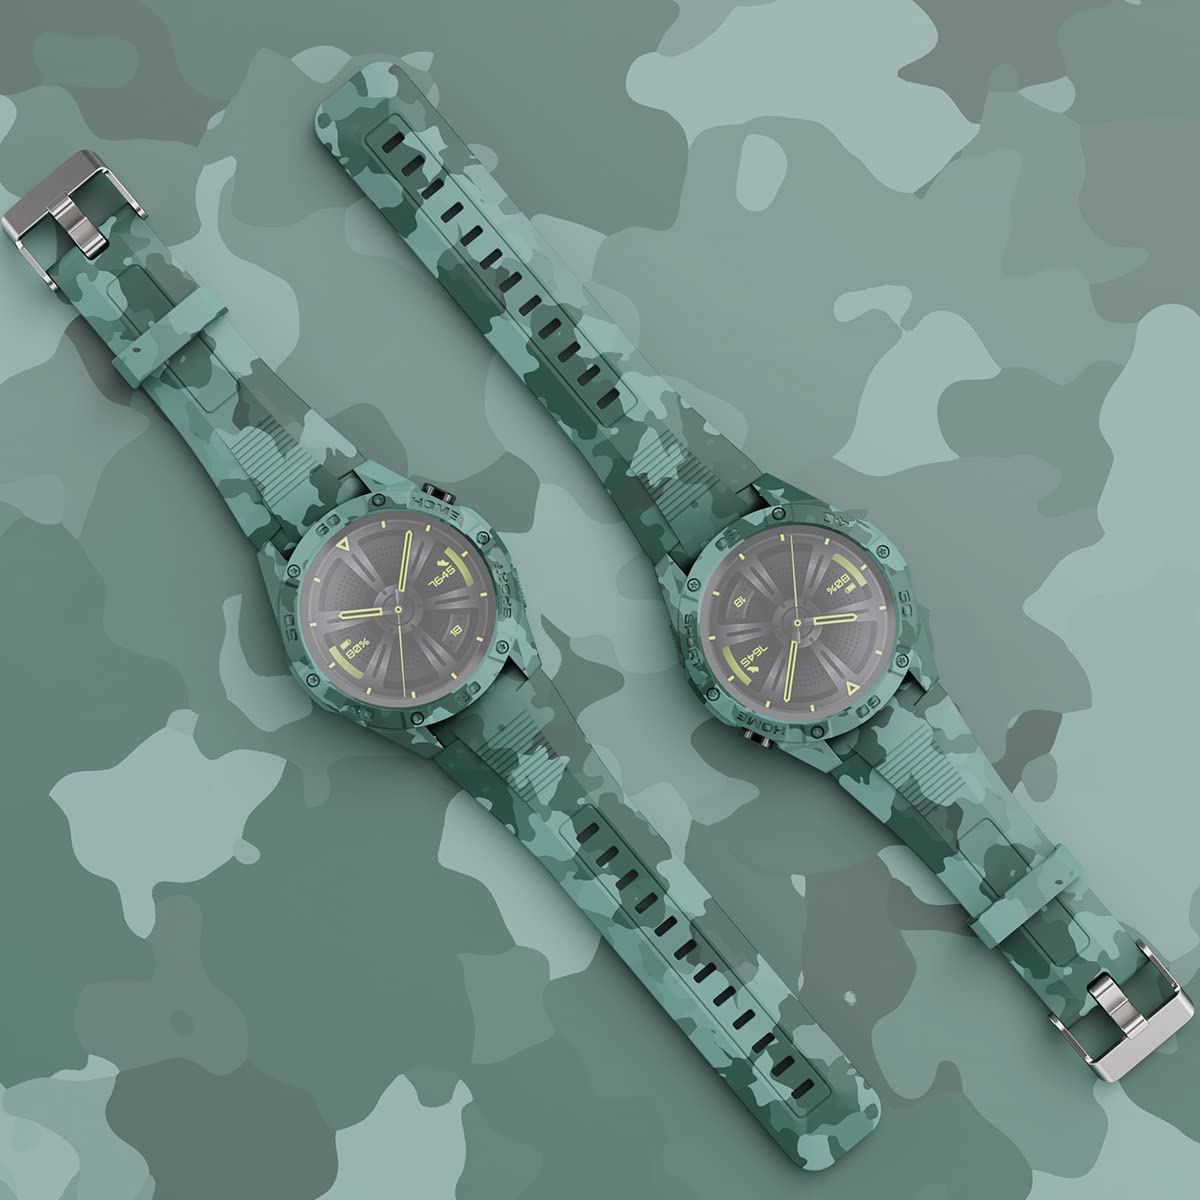 SIKAI for Huawei Watch GT3 46mm - Protective Case and Replacement Band Set in Camouflage Desig